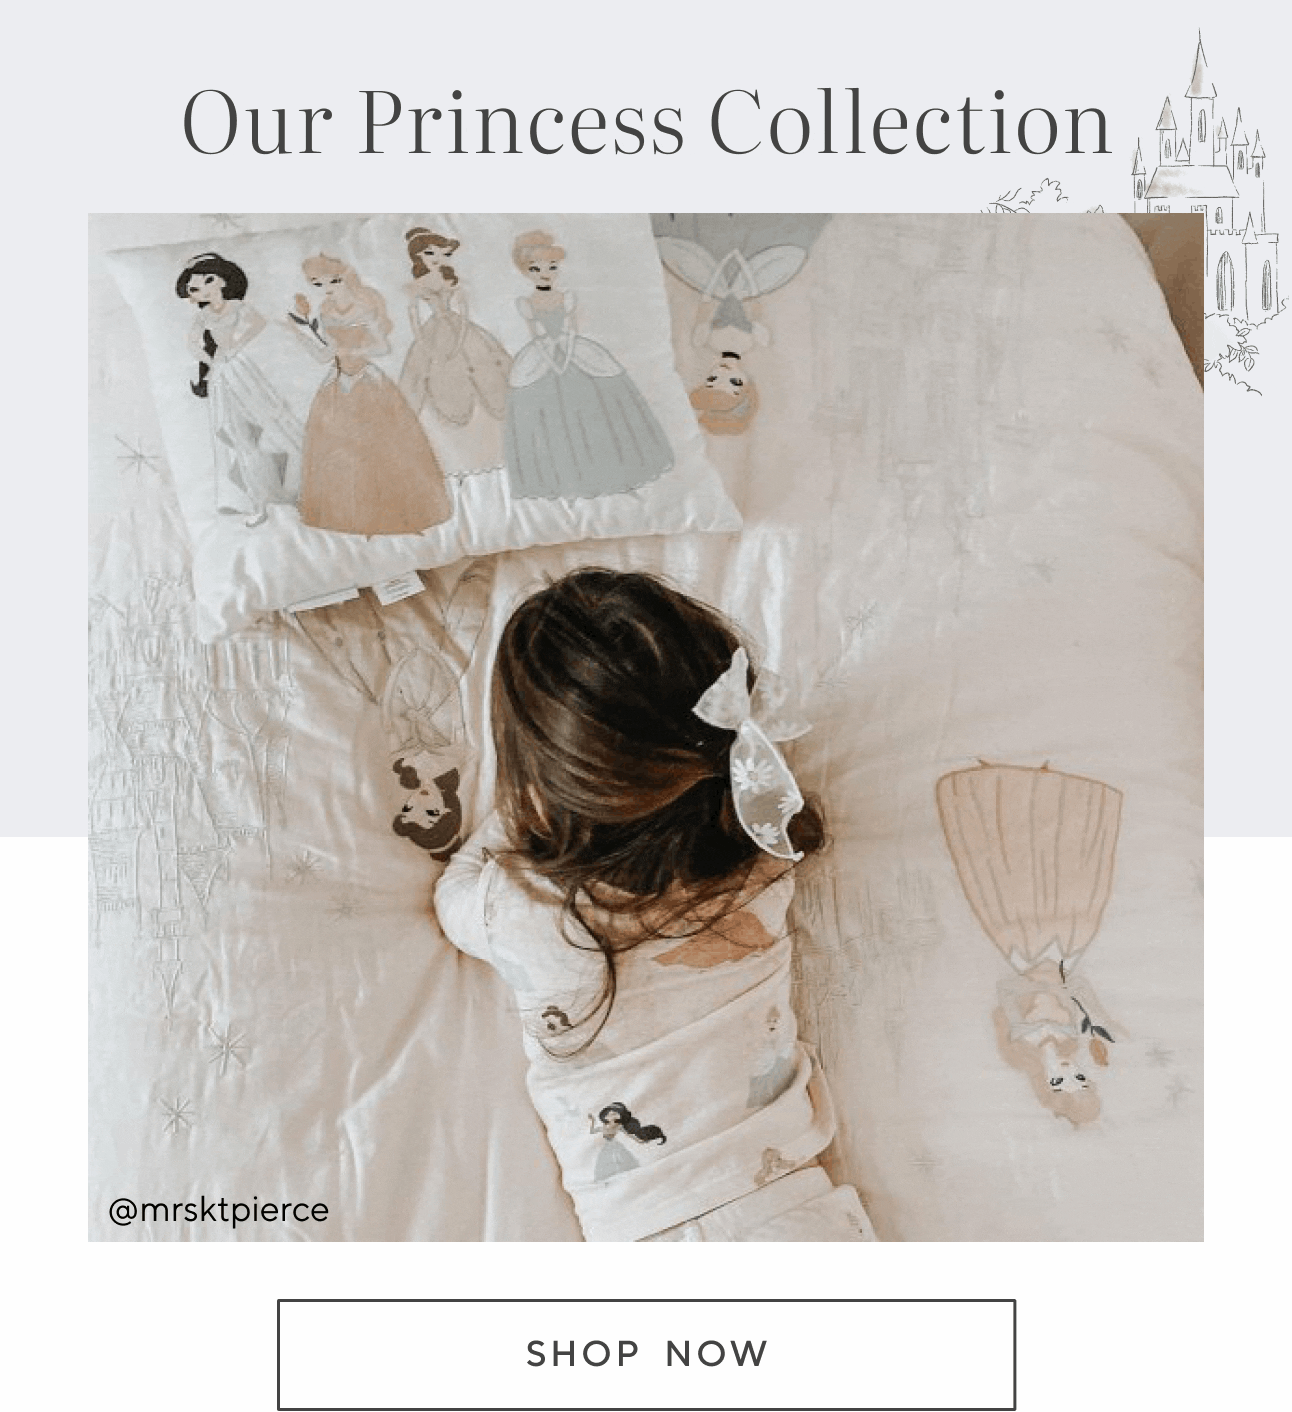 OUR PRINCESS COLLECTION